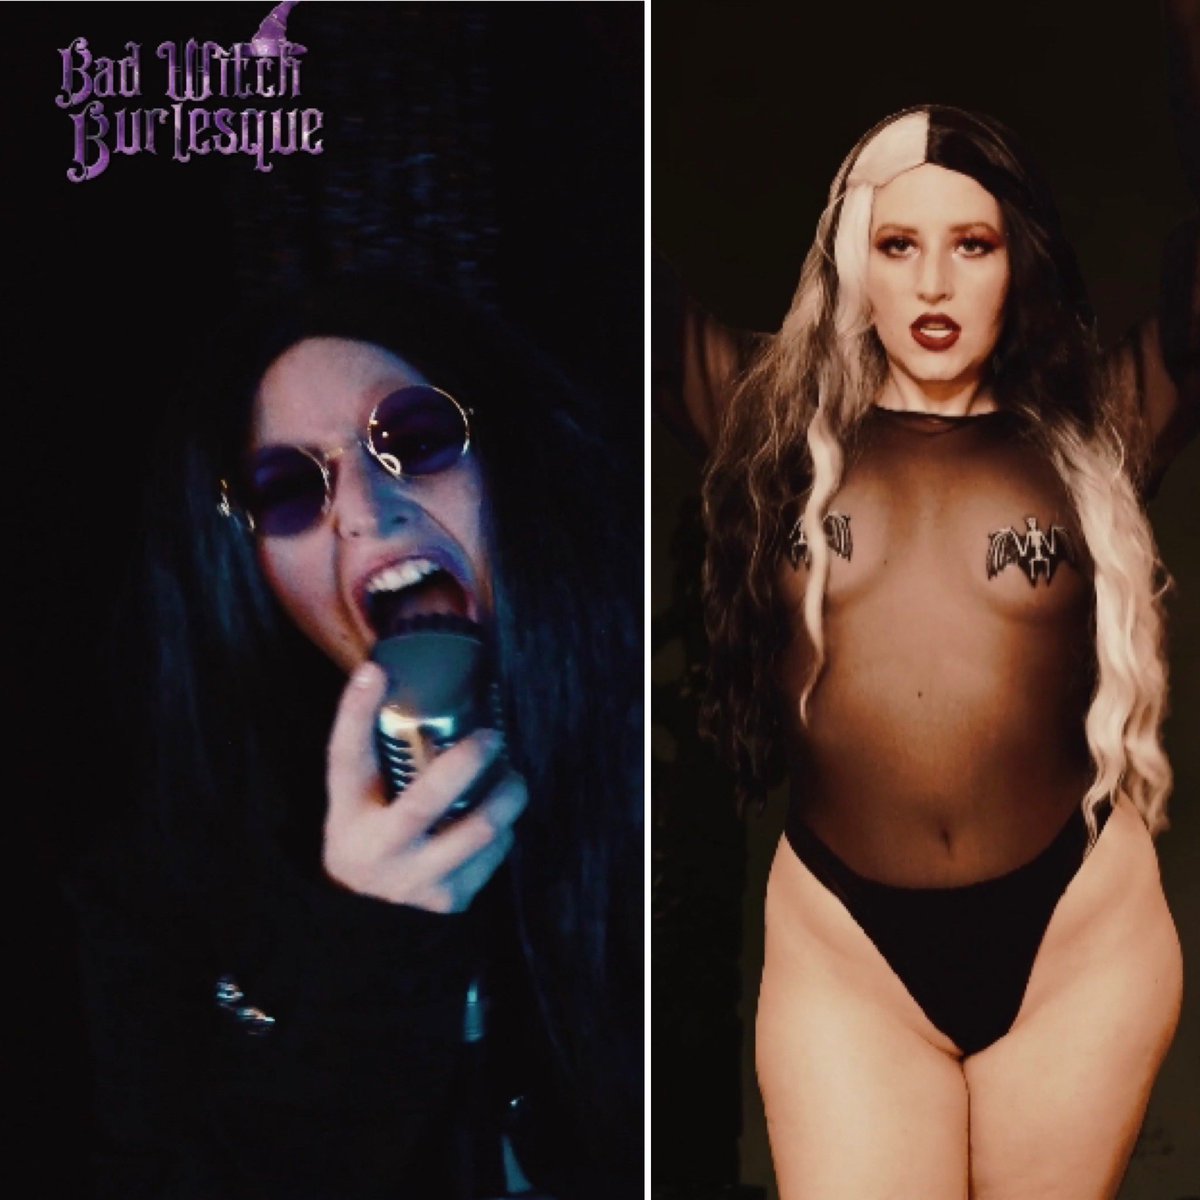 Get yourself a witch who can do both! @chainsawpinup in our NYE special is EVERYTHING 🤘🏻🤘🏻🤘🏻 LINK IN BIO #nye #nyeathome #virtualburlesque #gothgirls